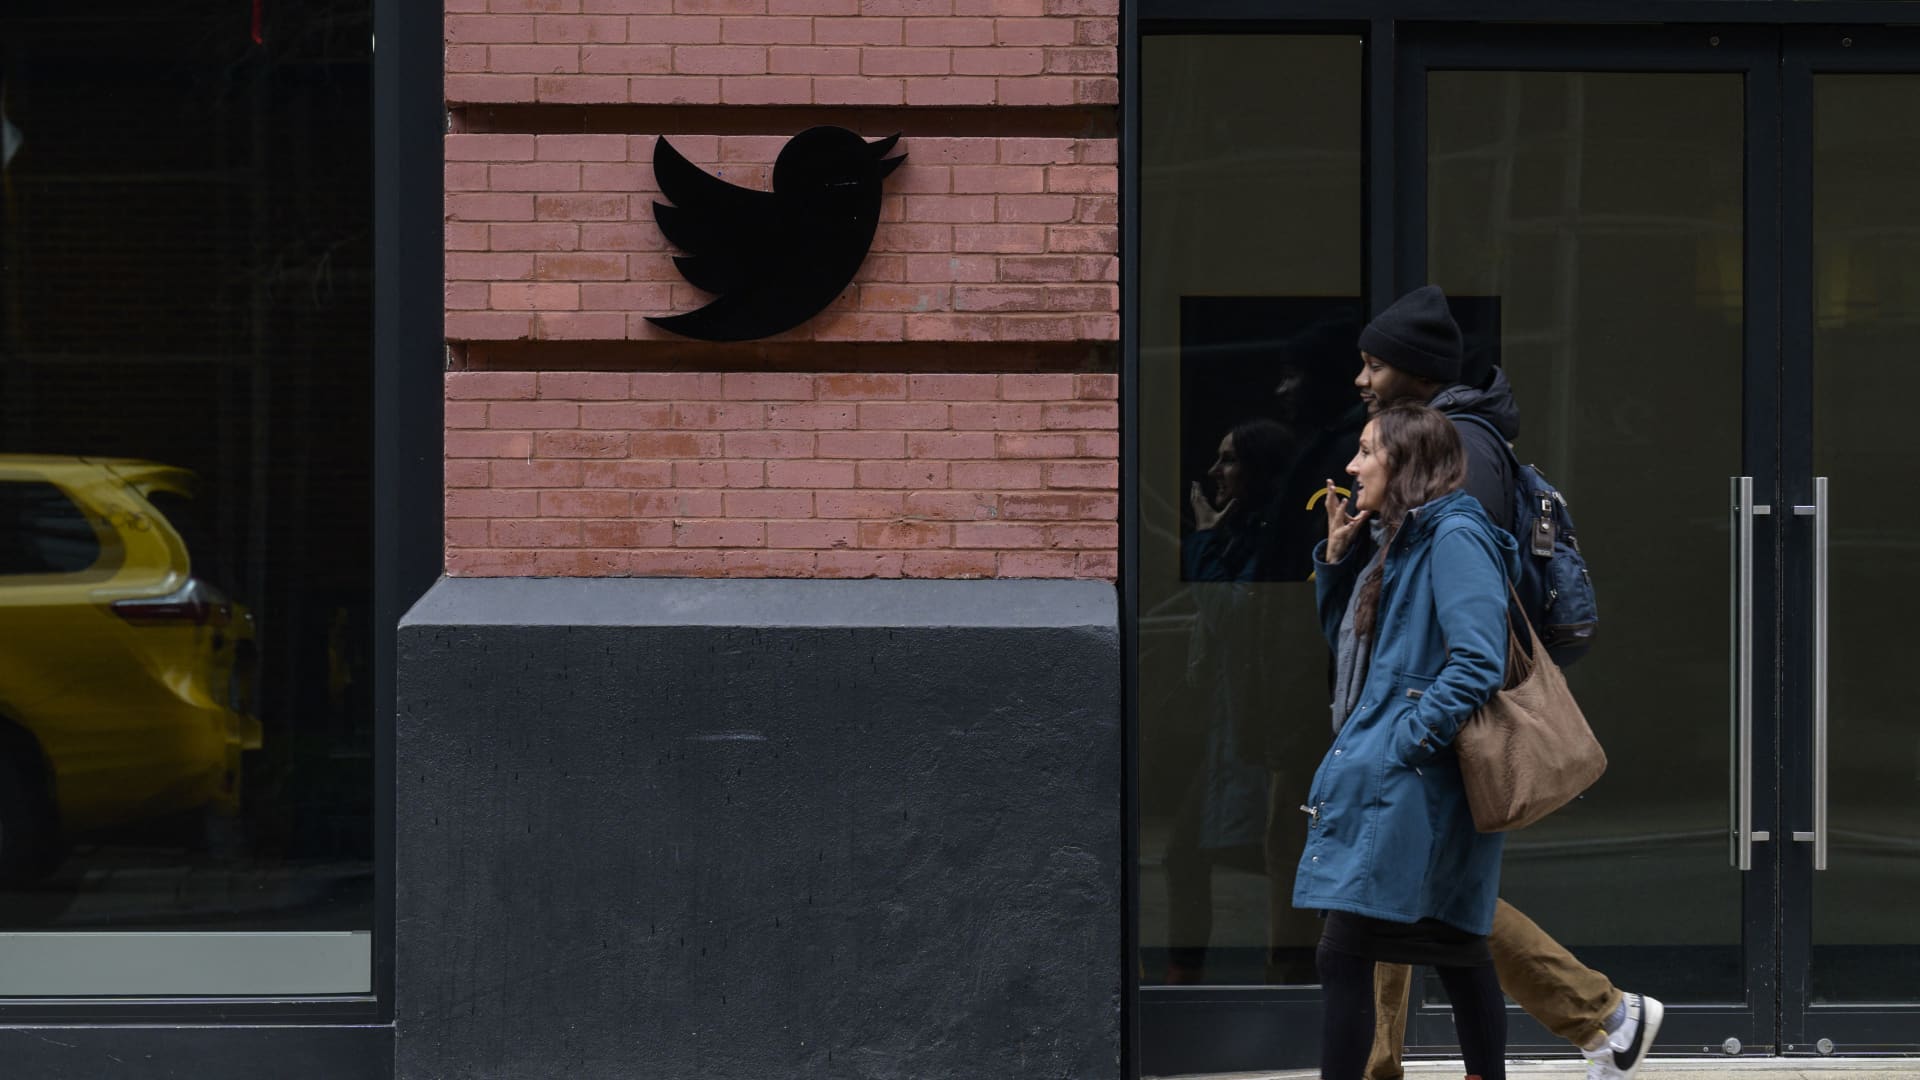 Twitter's laid-off workers cannot pursue claims via class-action lawsuit: judge